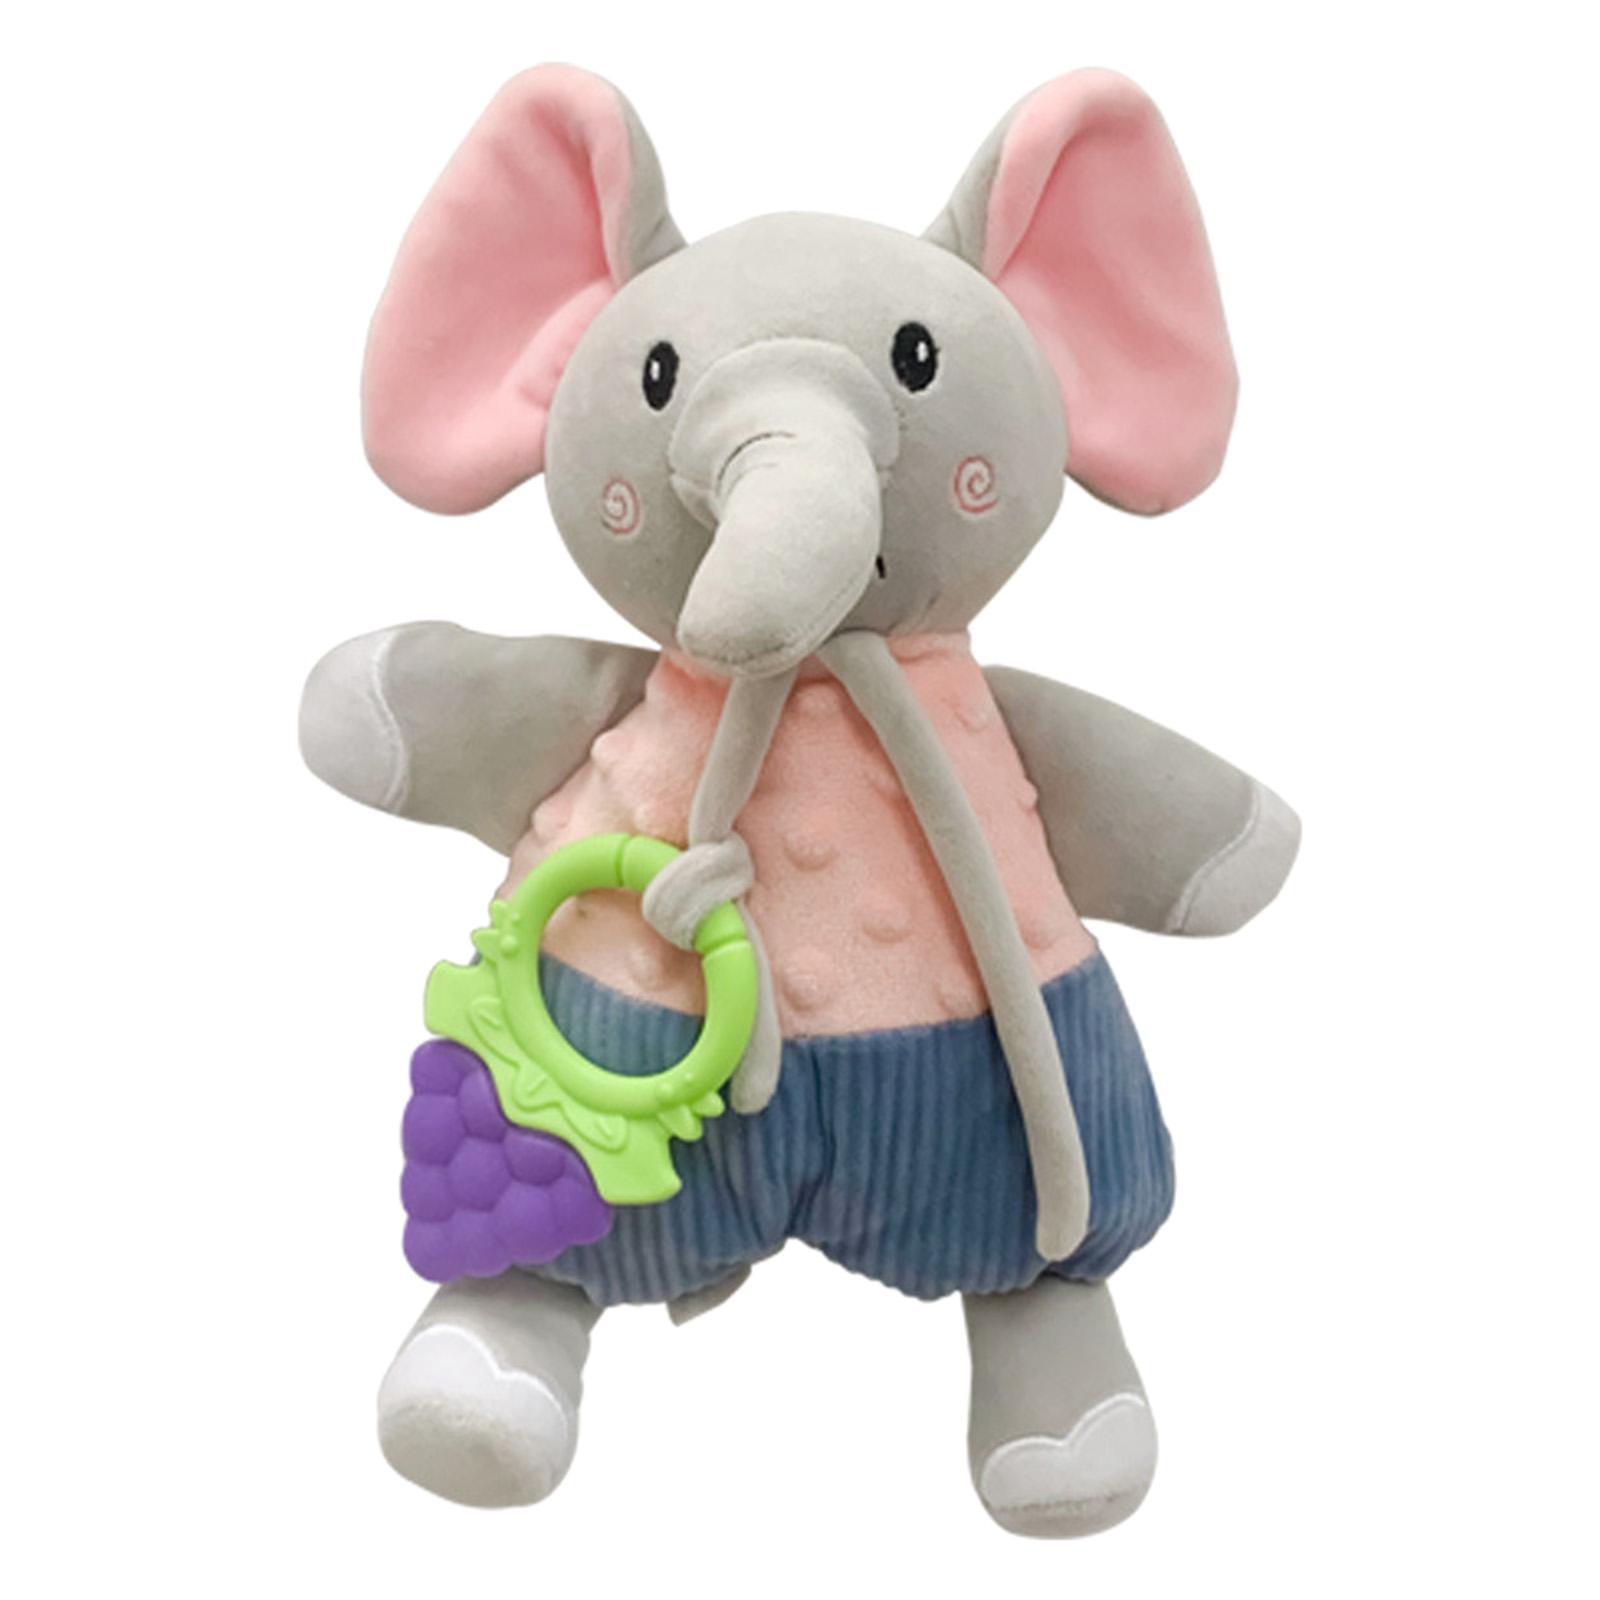 Soothing Toy Stuffed Animals for Sleeping Baby Carriage Birthday Gifts